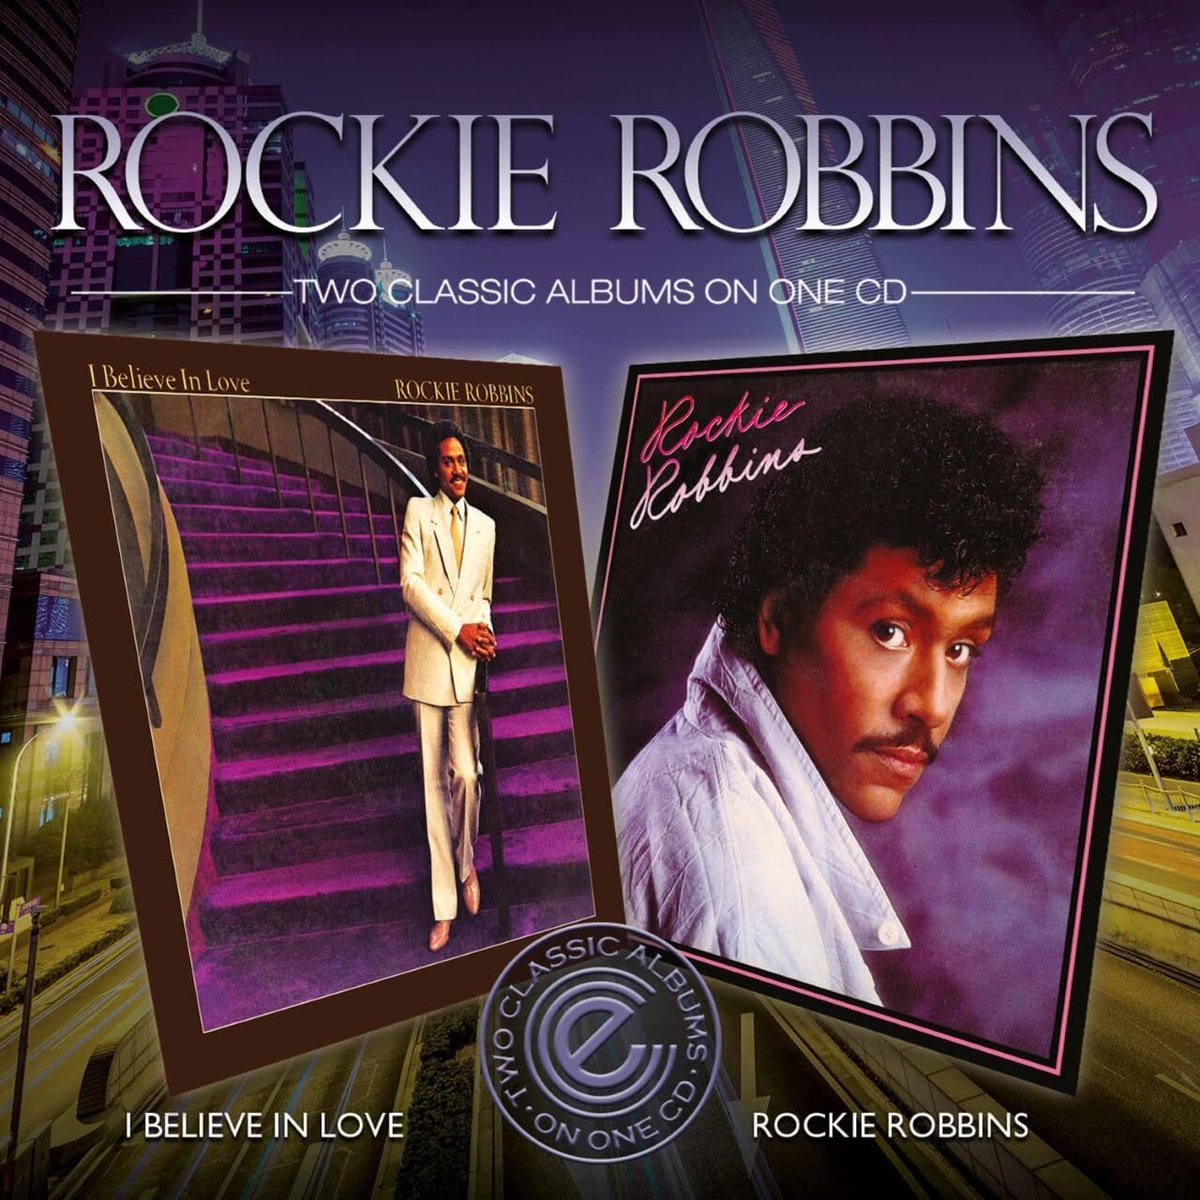 Light Mellow on the Web ~ Turntable Diary、更新済みです。
■ ROCKIE ROBBINS ４CD Reissues lightmellow.livedoor.biz/archives/52389…
#RockieRobbins #BlackContemporary